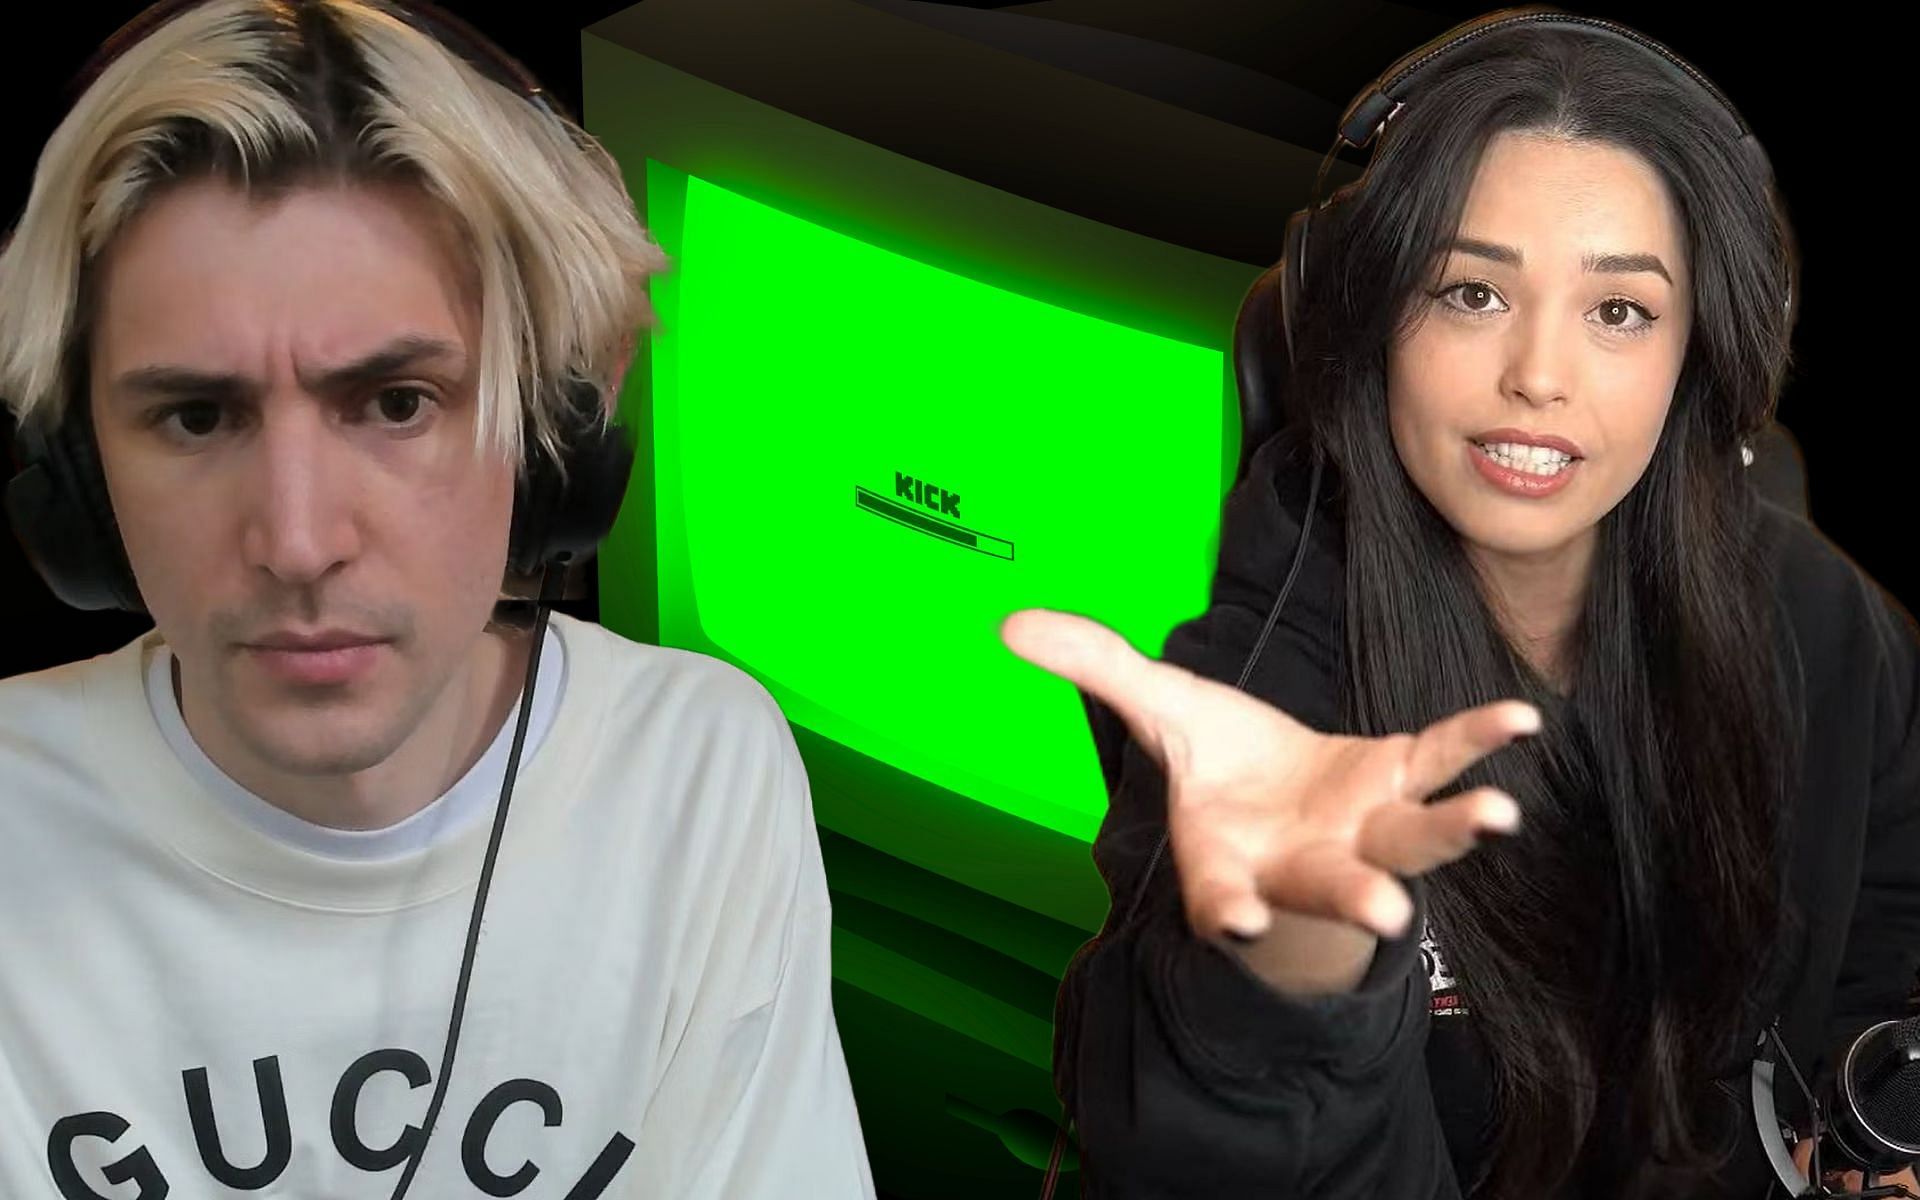 Valkyrae gives her take on xQc